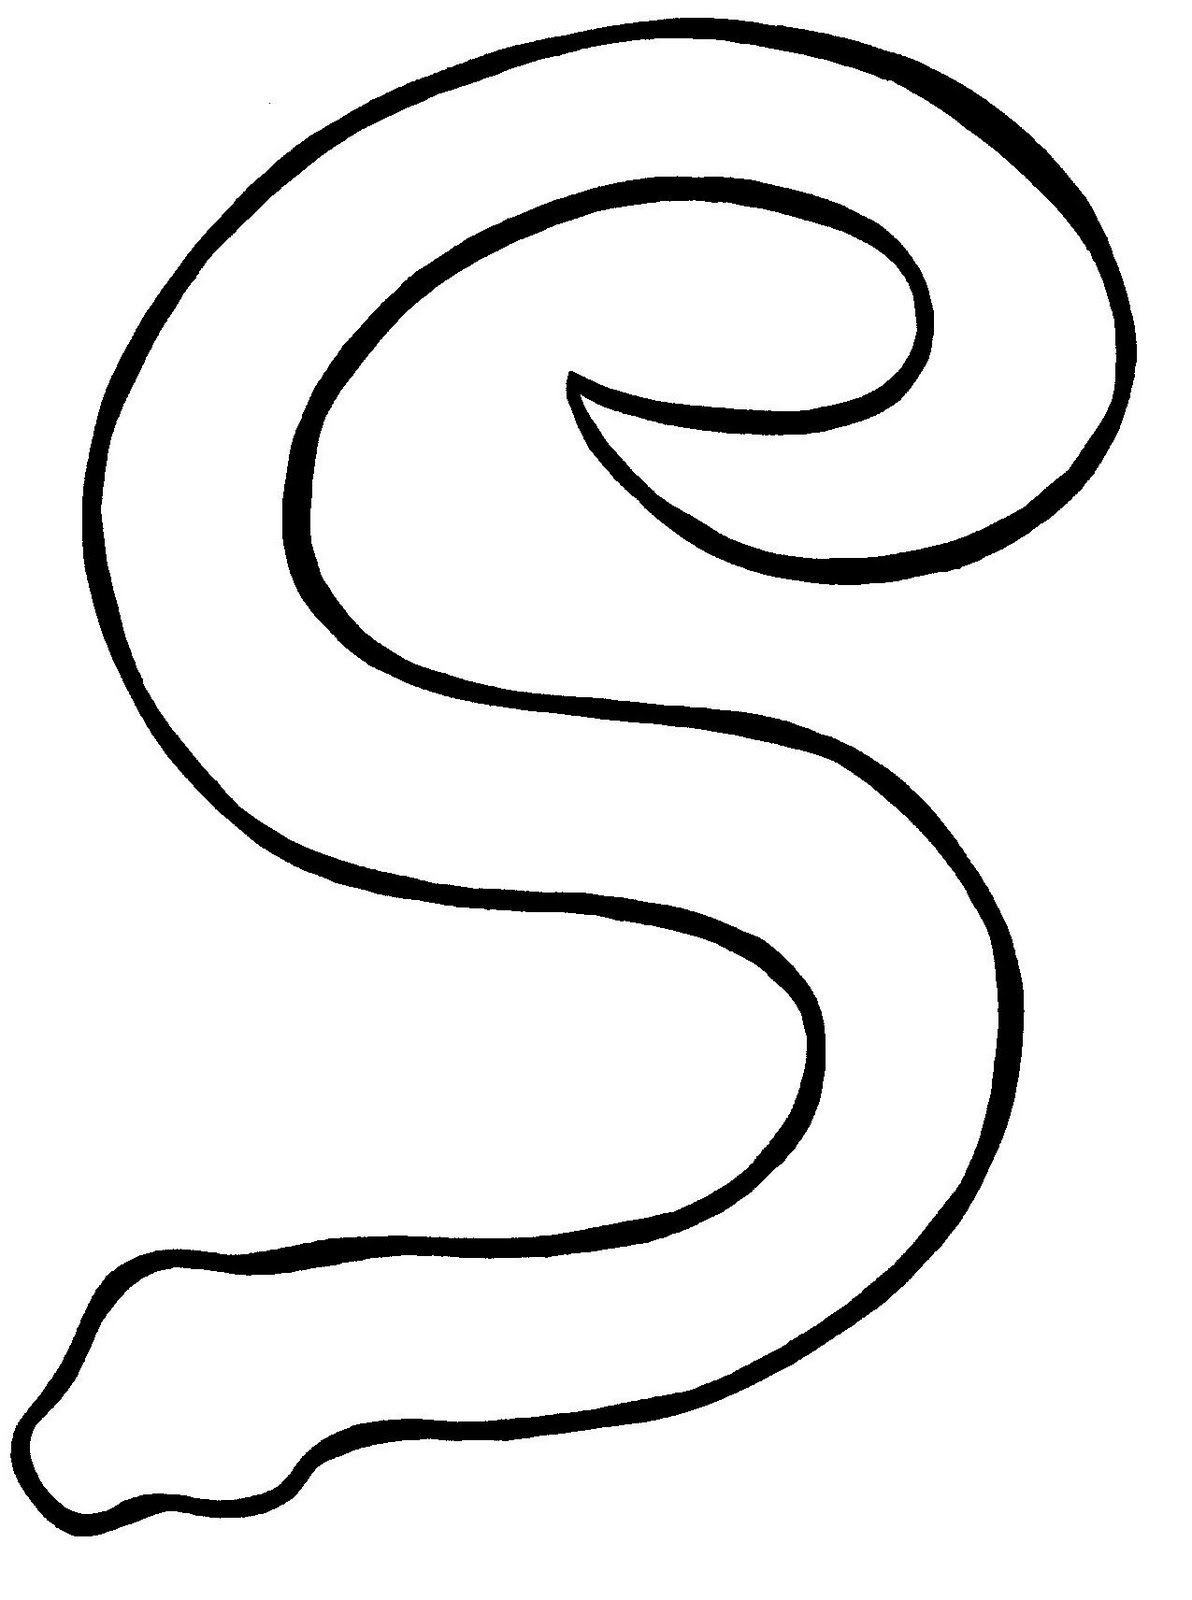 Best Photos of Pattern Snake Template - Paper Snake Template ...